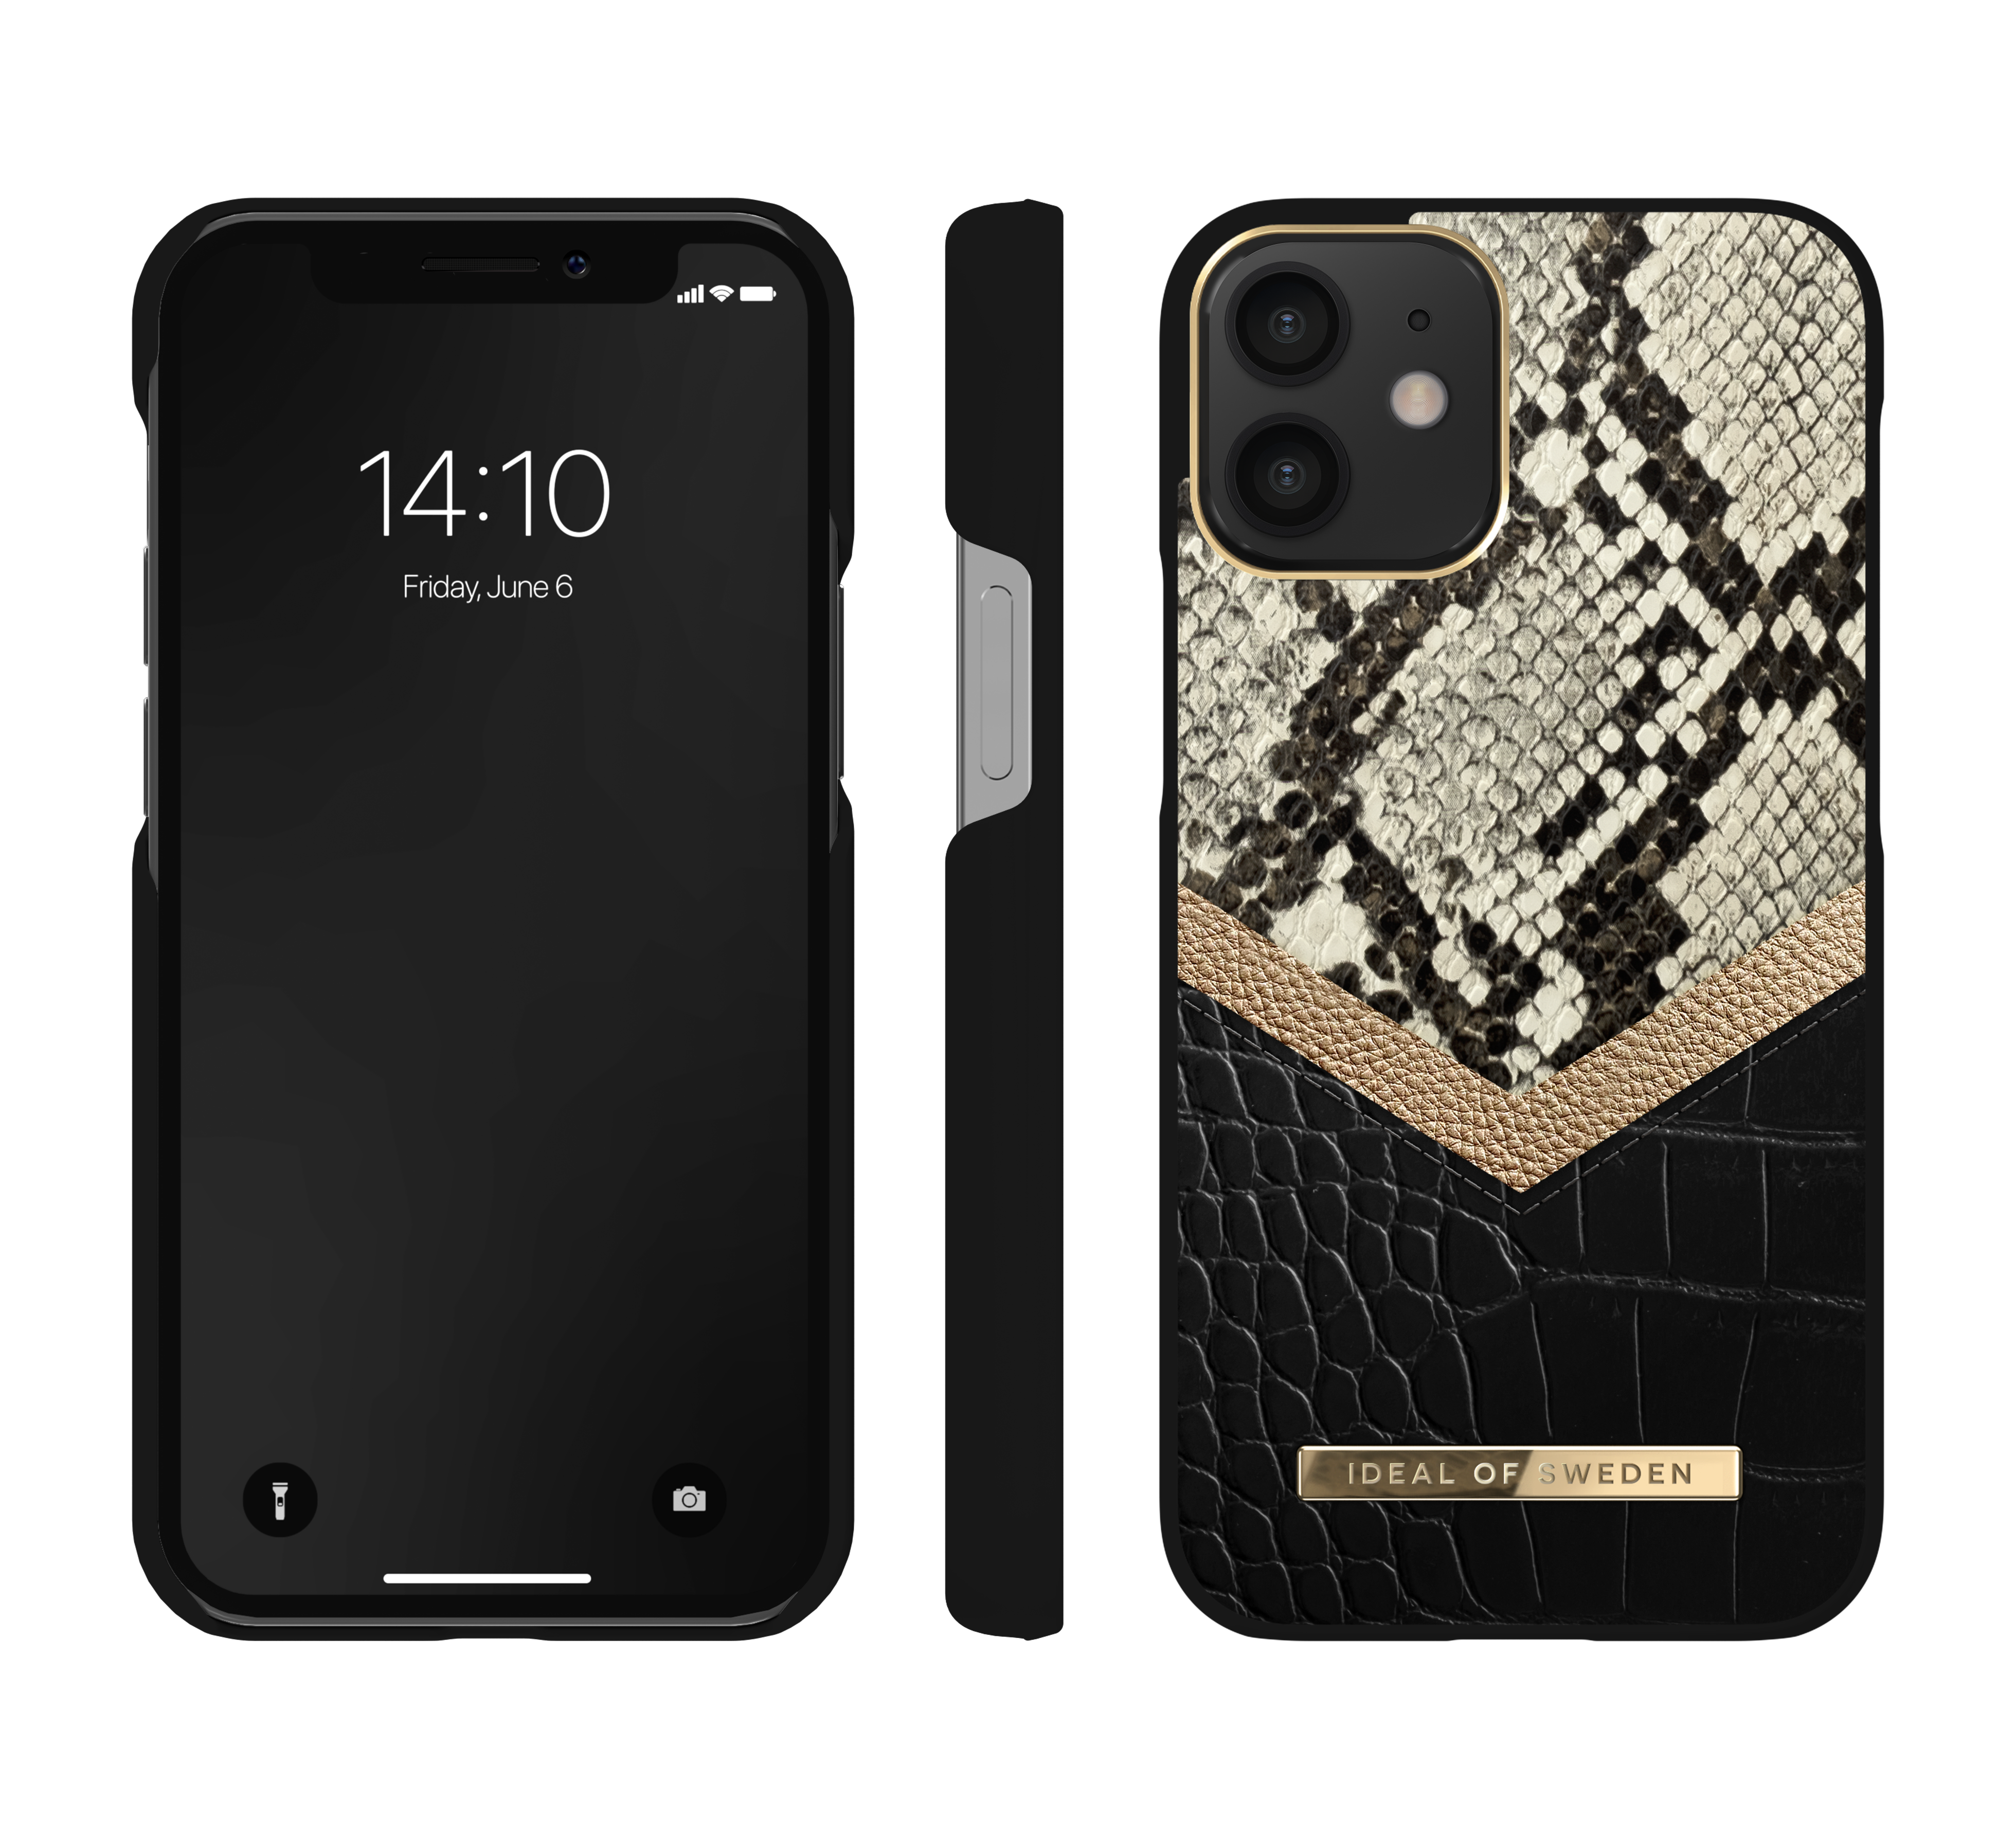 OF IDACSS20-I2054-199, Apple, Mini, IPhone Python SWEDEN 12 Midnight IDEAL Backcover,